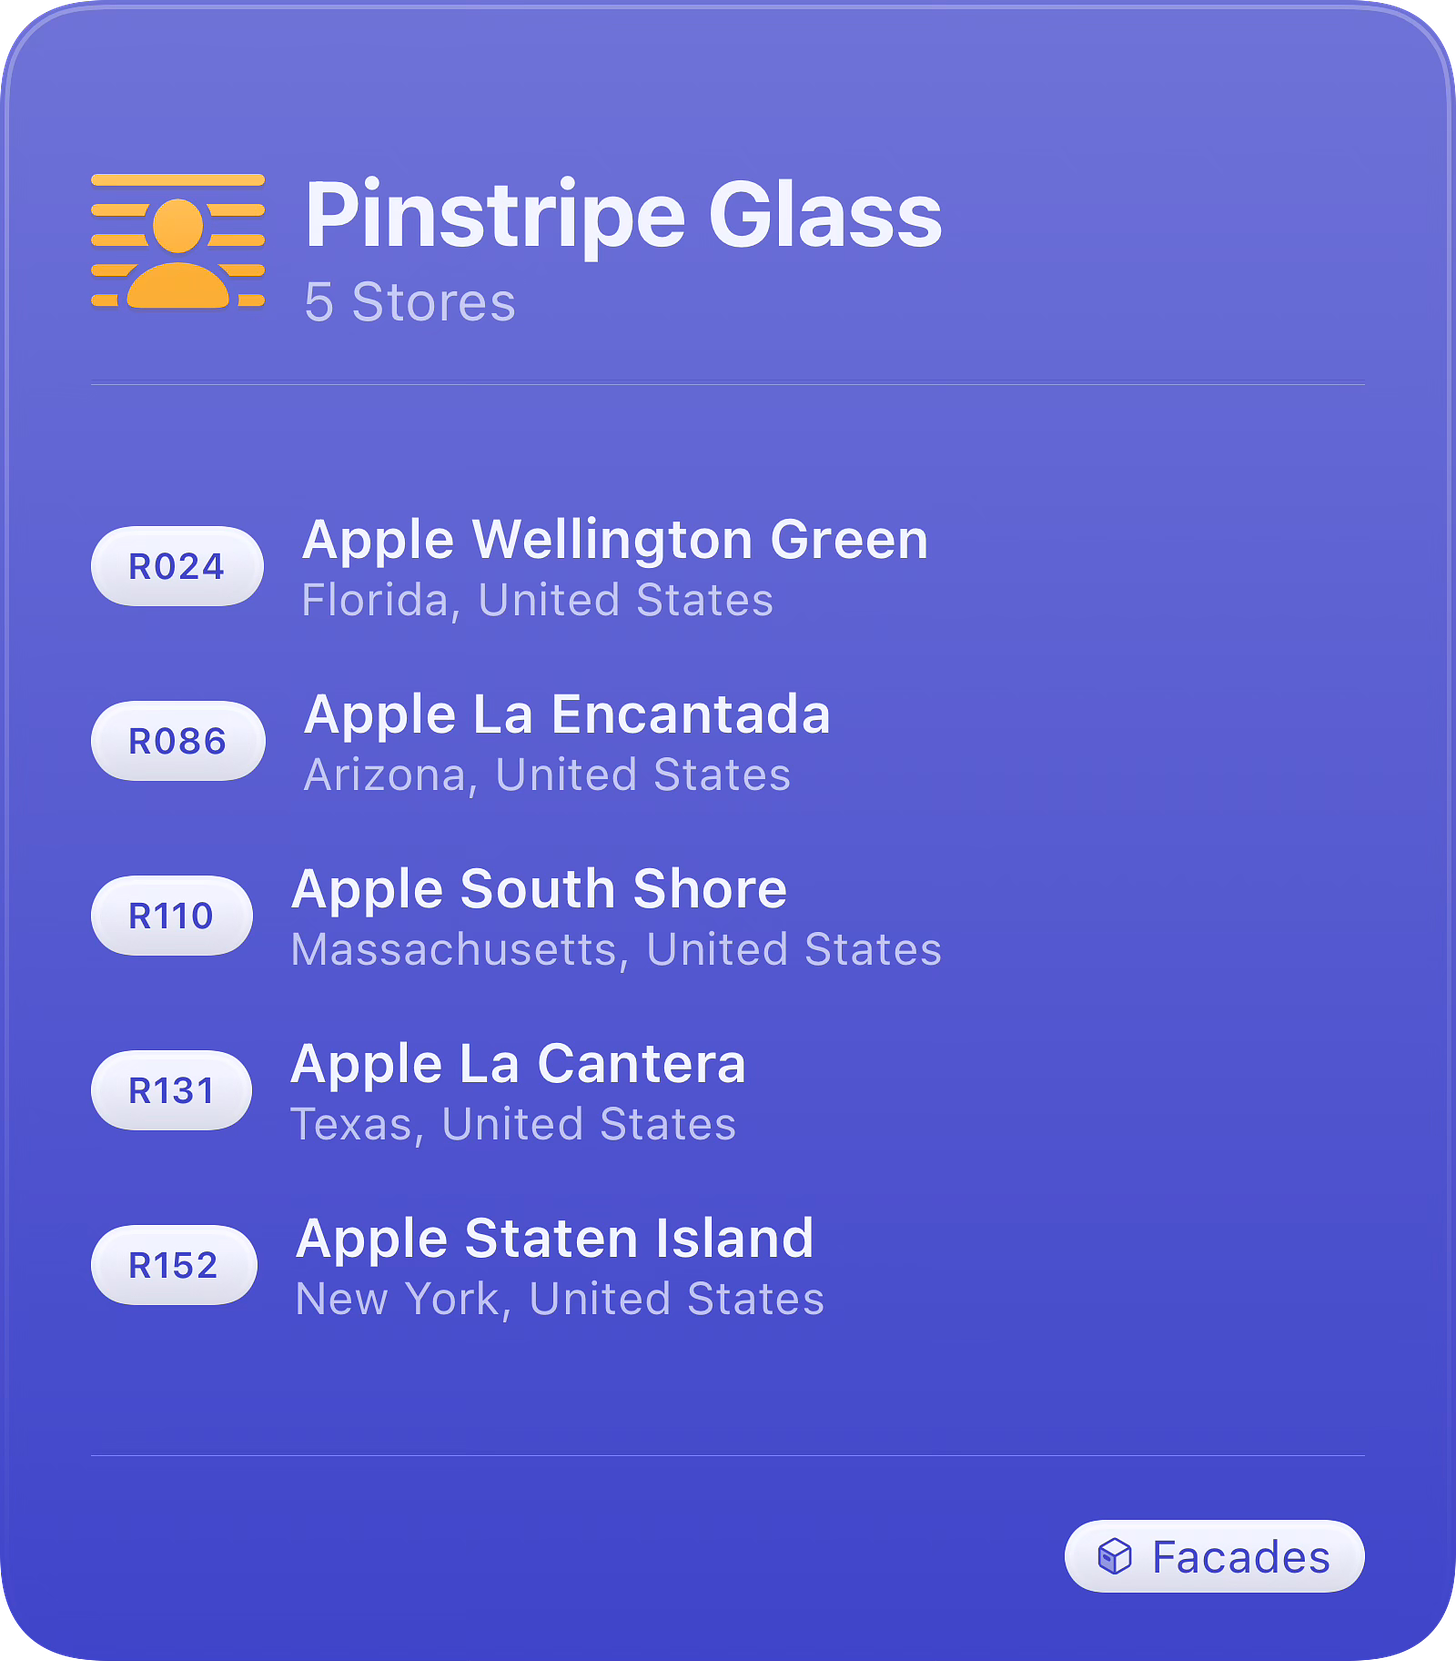 A list of five Apple Stores with Pinstripe Glass dividers: Apple Wellington Green, La Encantada, South Shore, La Cantera, and Staten Island.